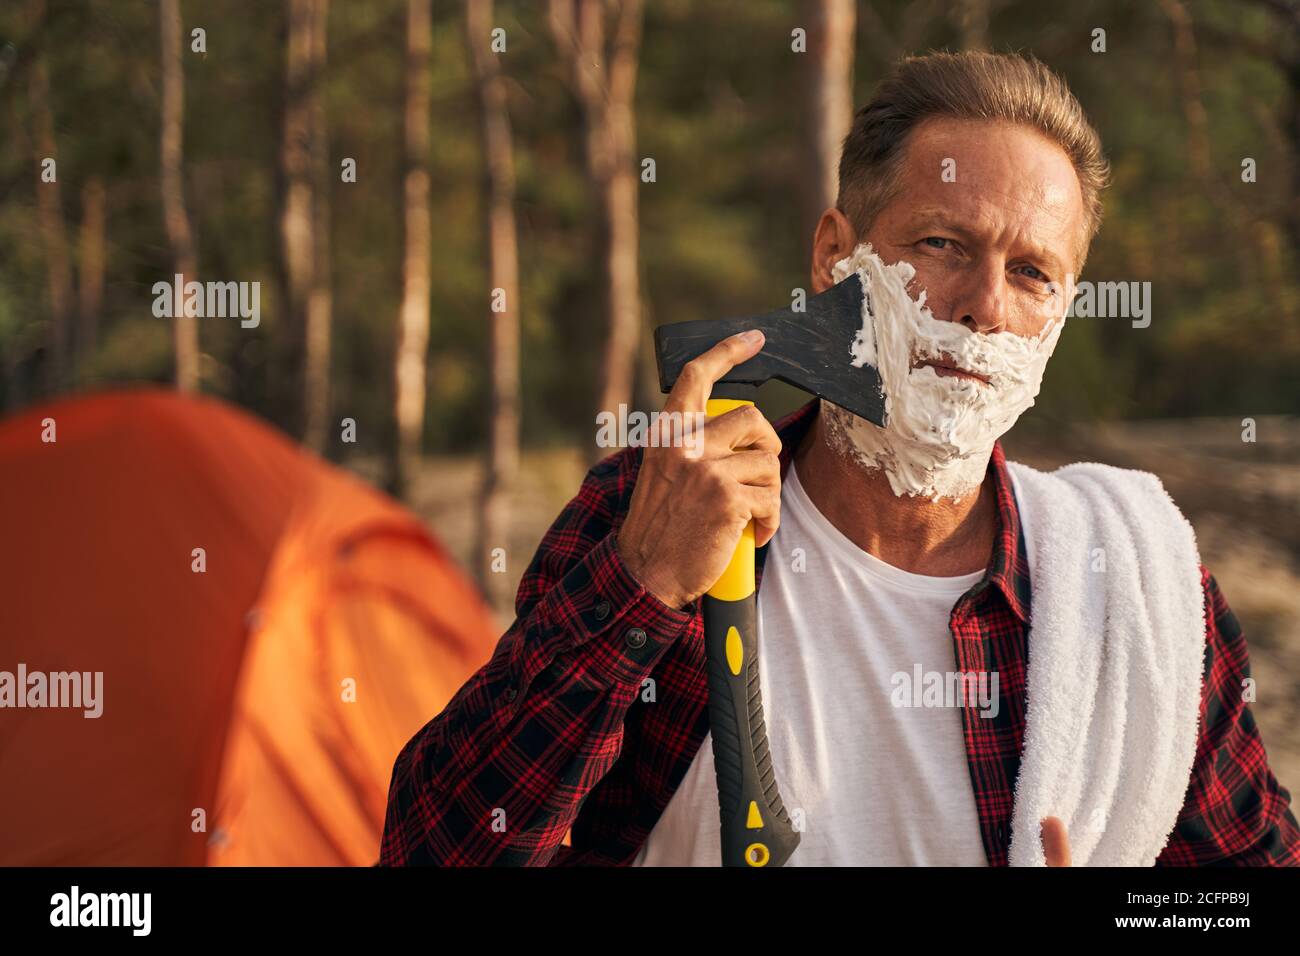 Mature man shaving with axe while going camping Stock Photo